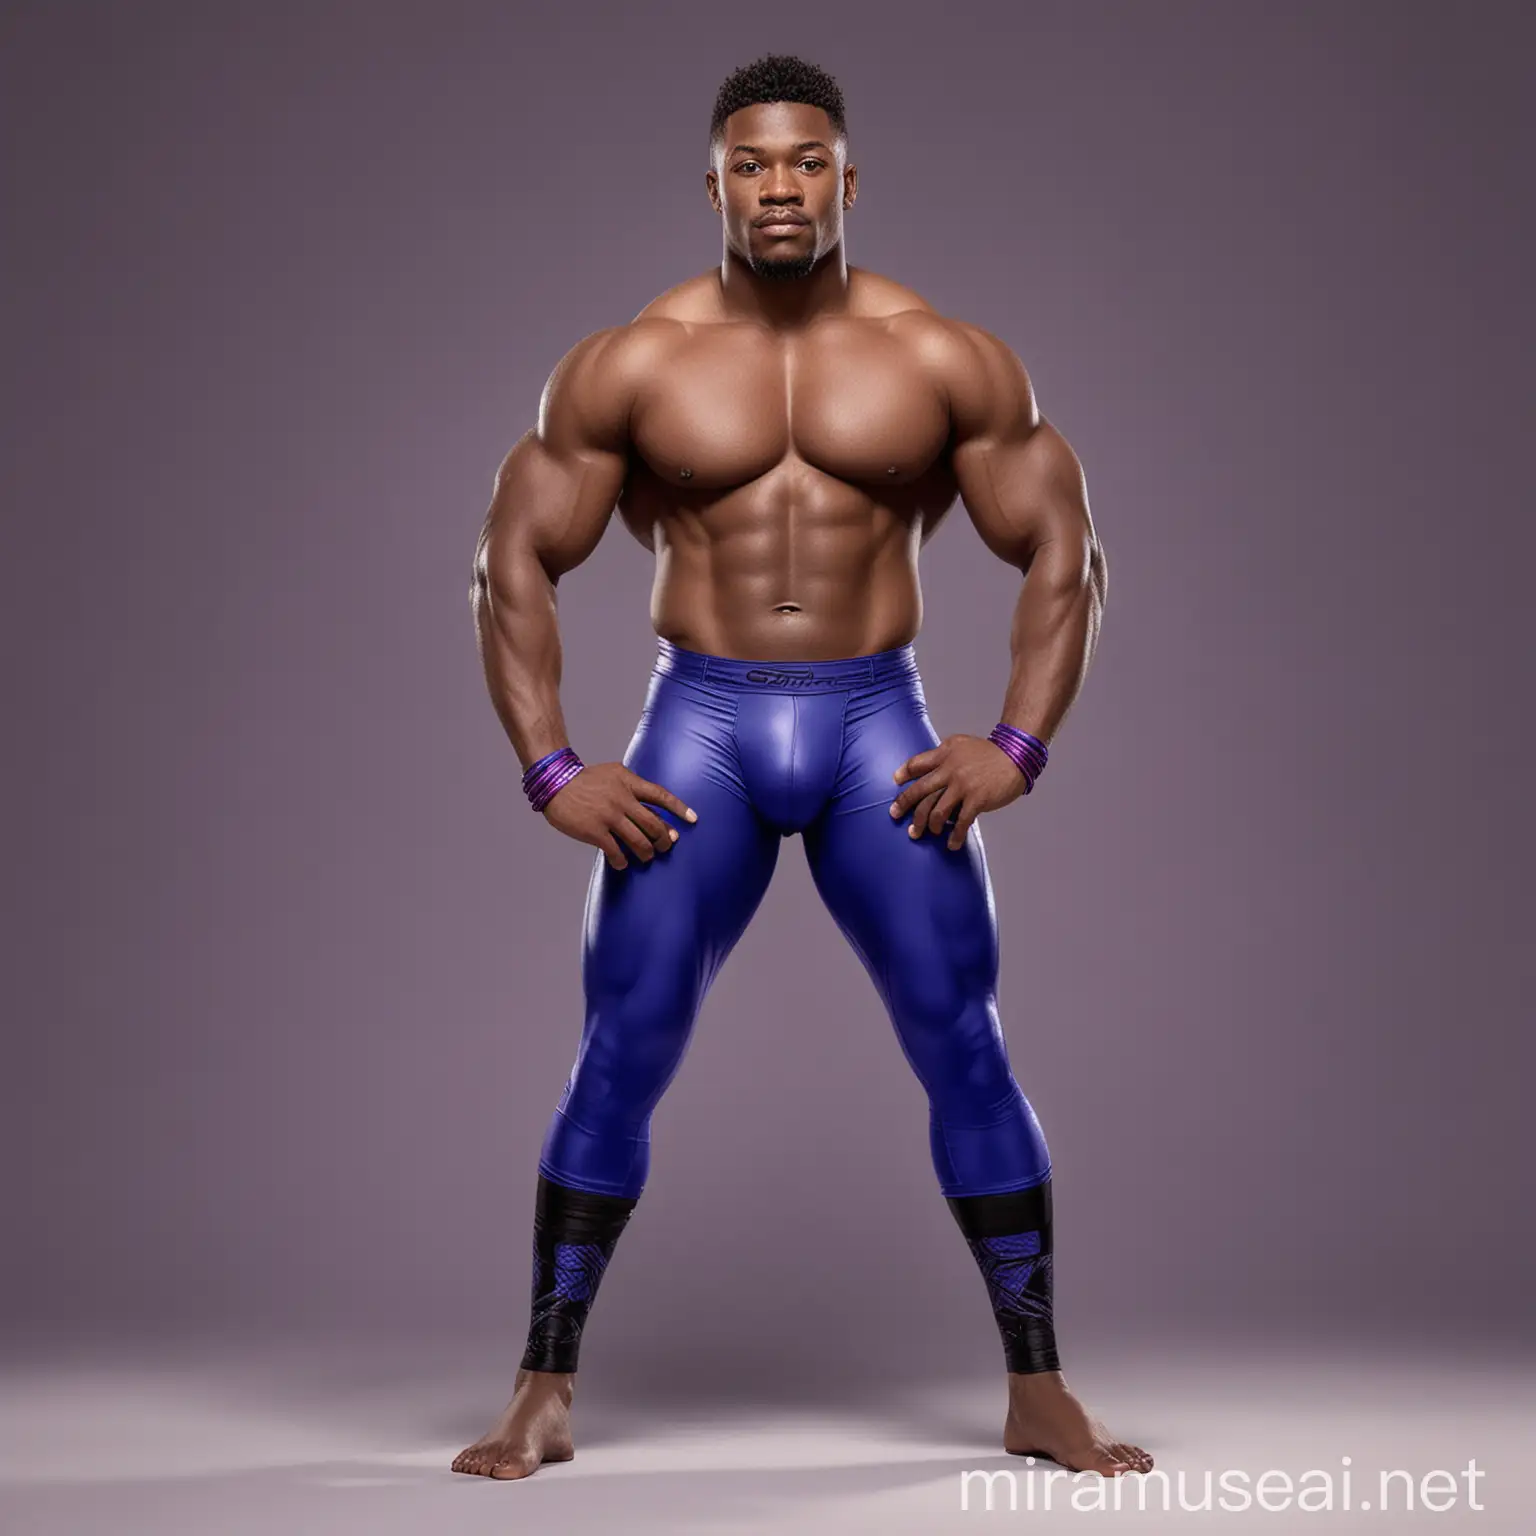 Charming shirtless muscular 30 year old male African American wrestler, with brown eyes, wearing  long cobalt blue (leaning to purple) and black spandex leggings, plus some wristbands. Pixar style art.